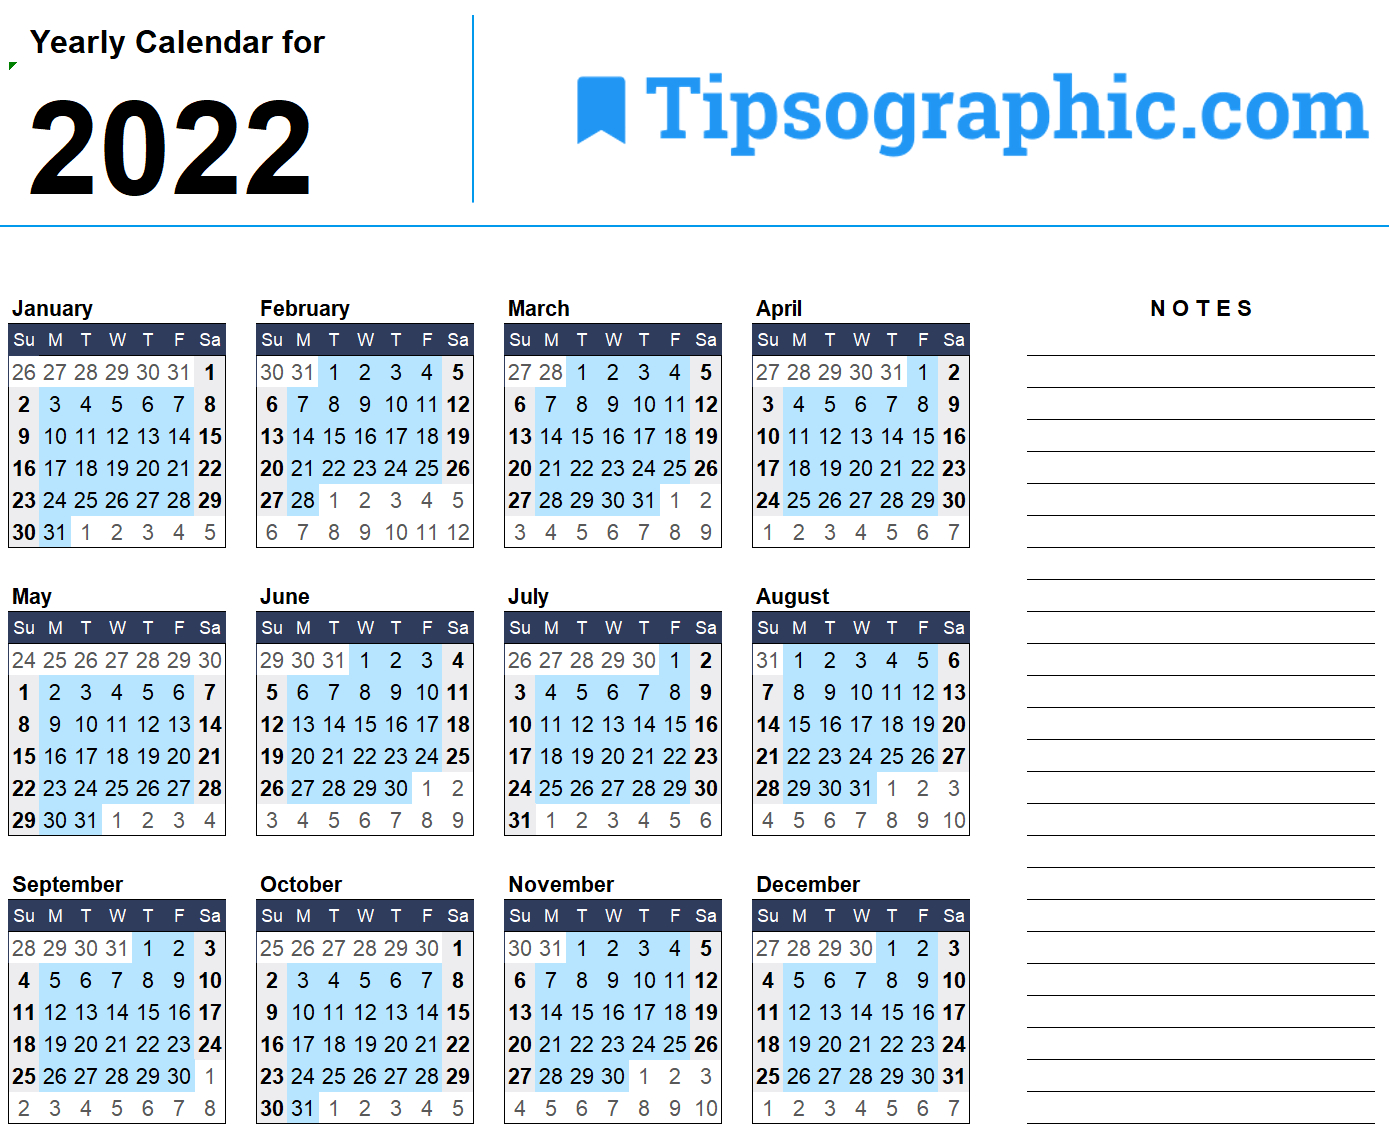 2022 Calendar Templates &amp; Images | Tipsographic  Whole Year Printable Calendar 2022